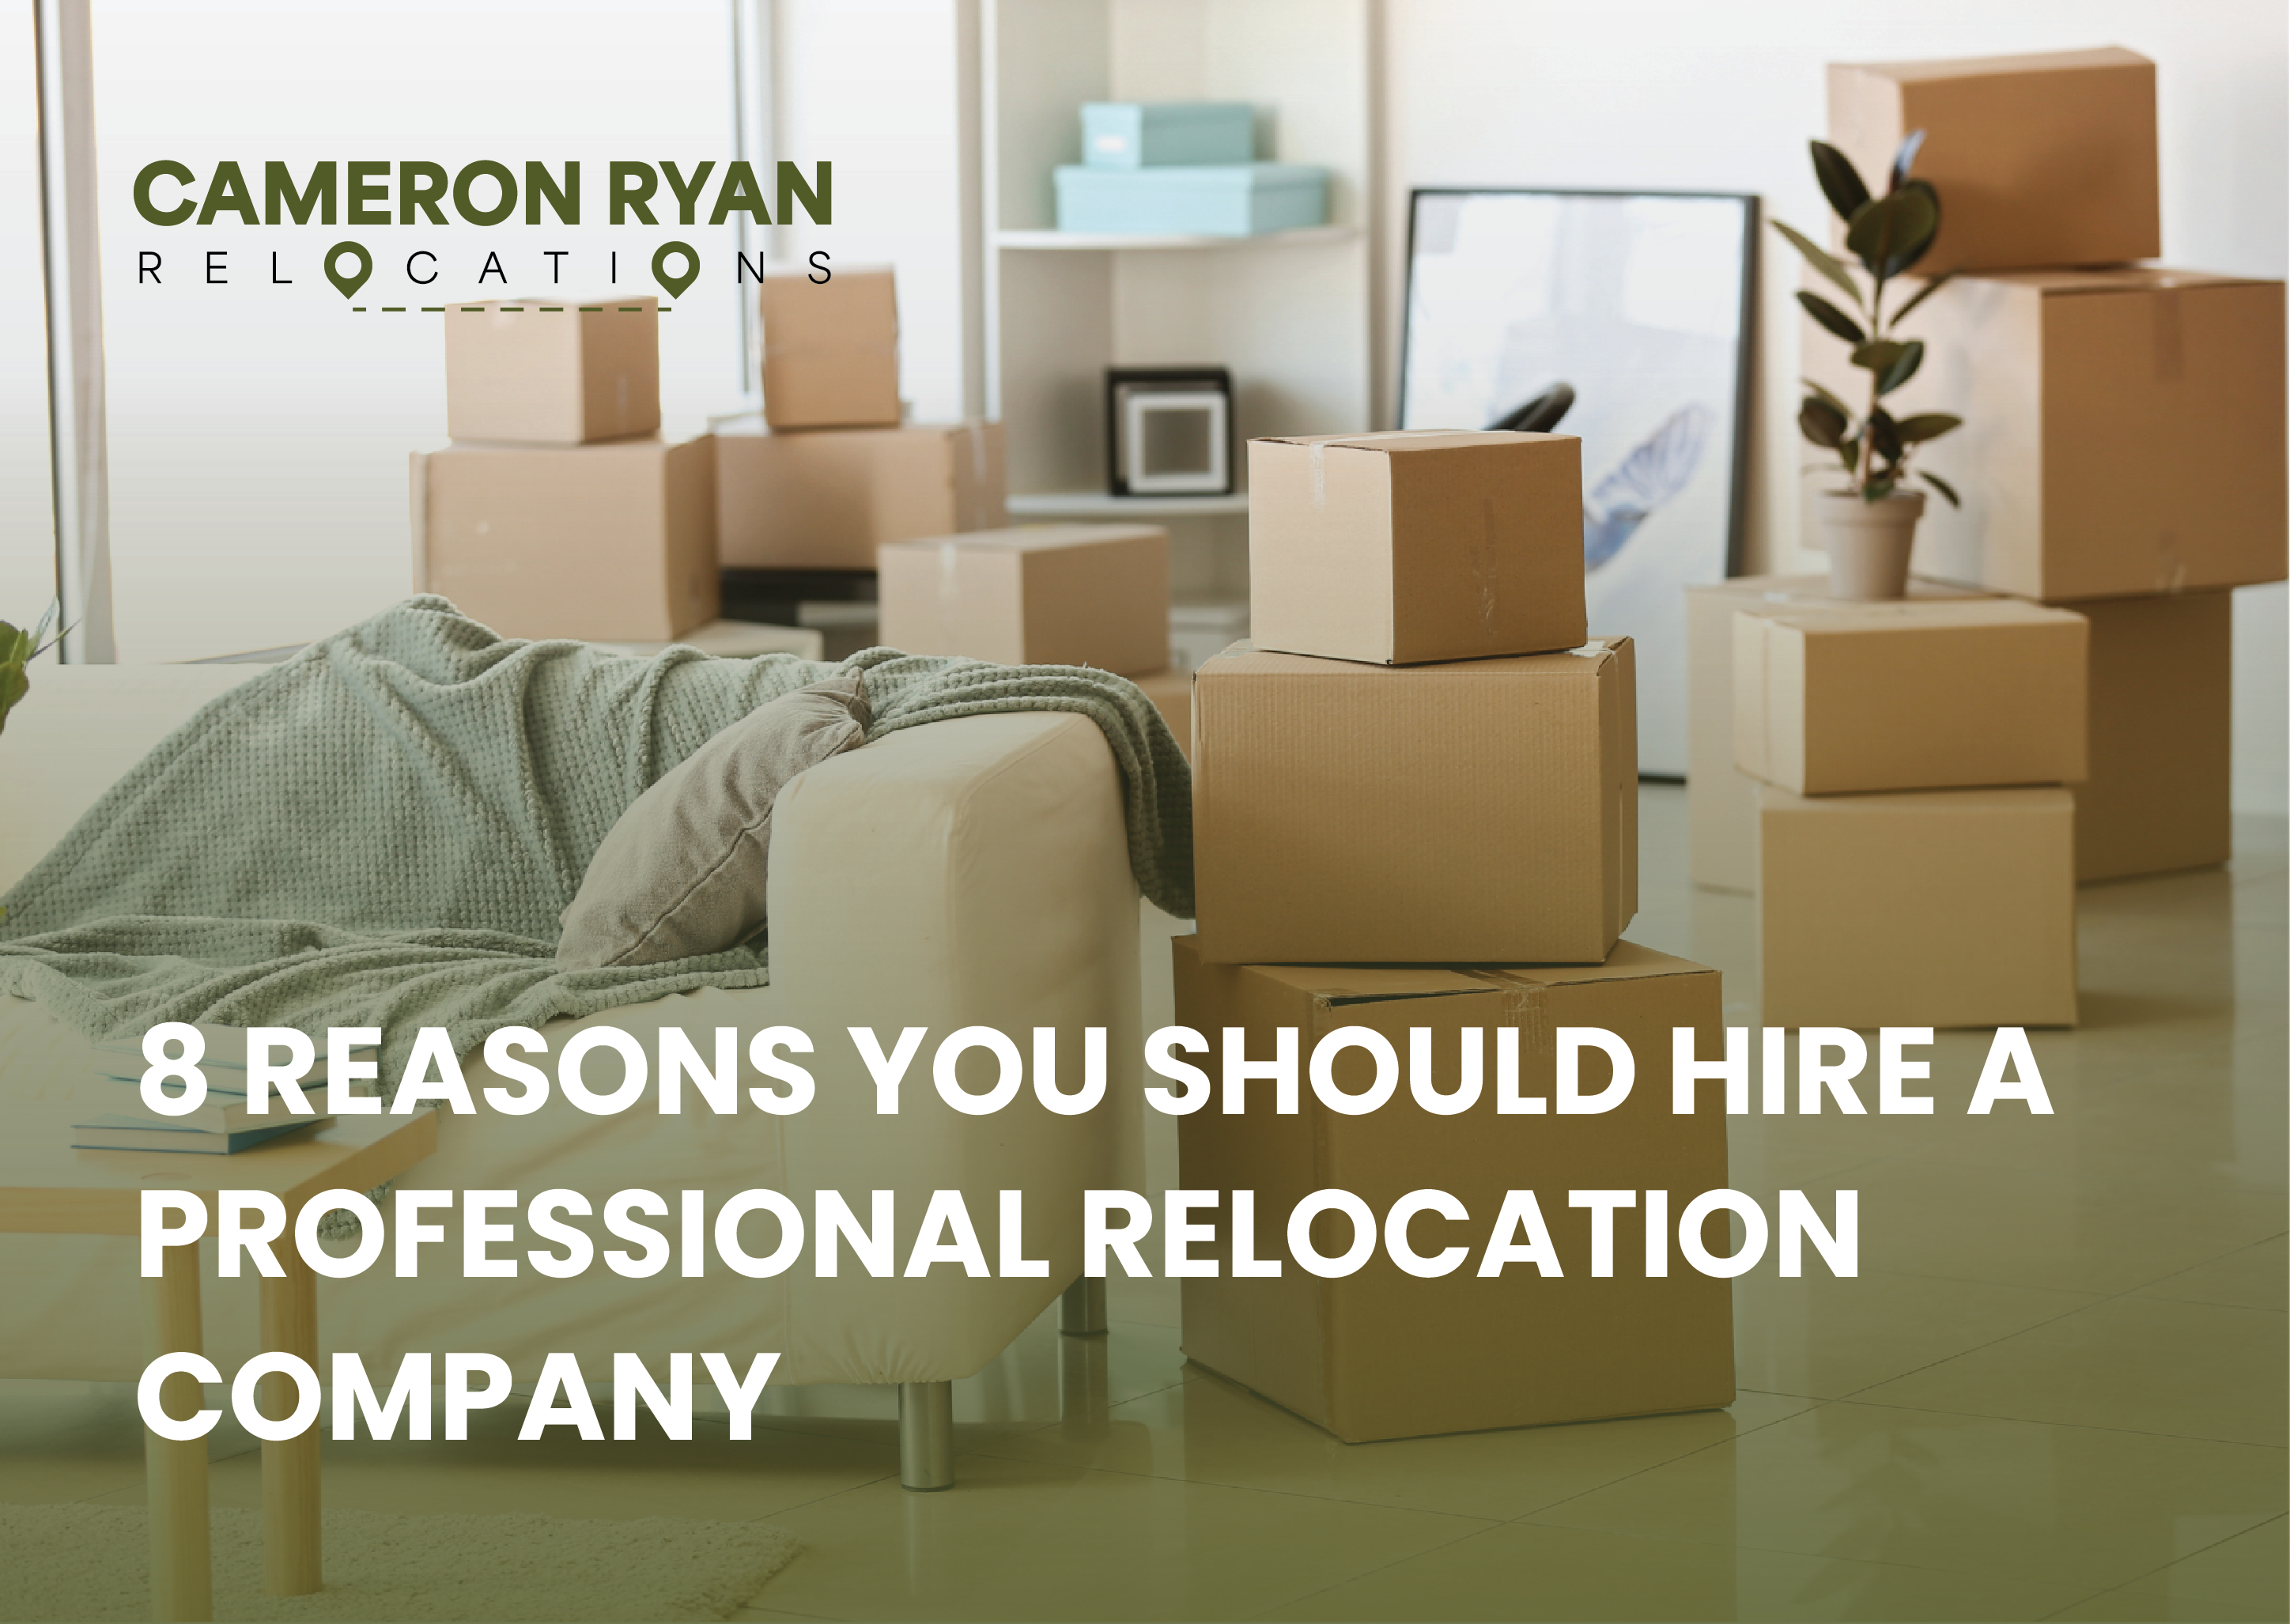 Featured image for “8 Reasons You Should Hire a Professional Relocation Company”